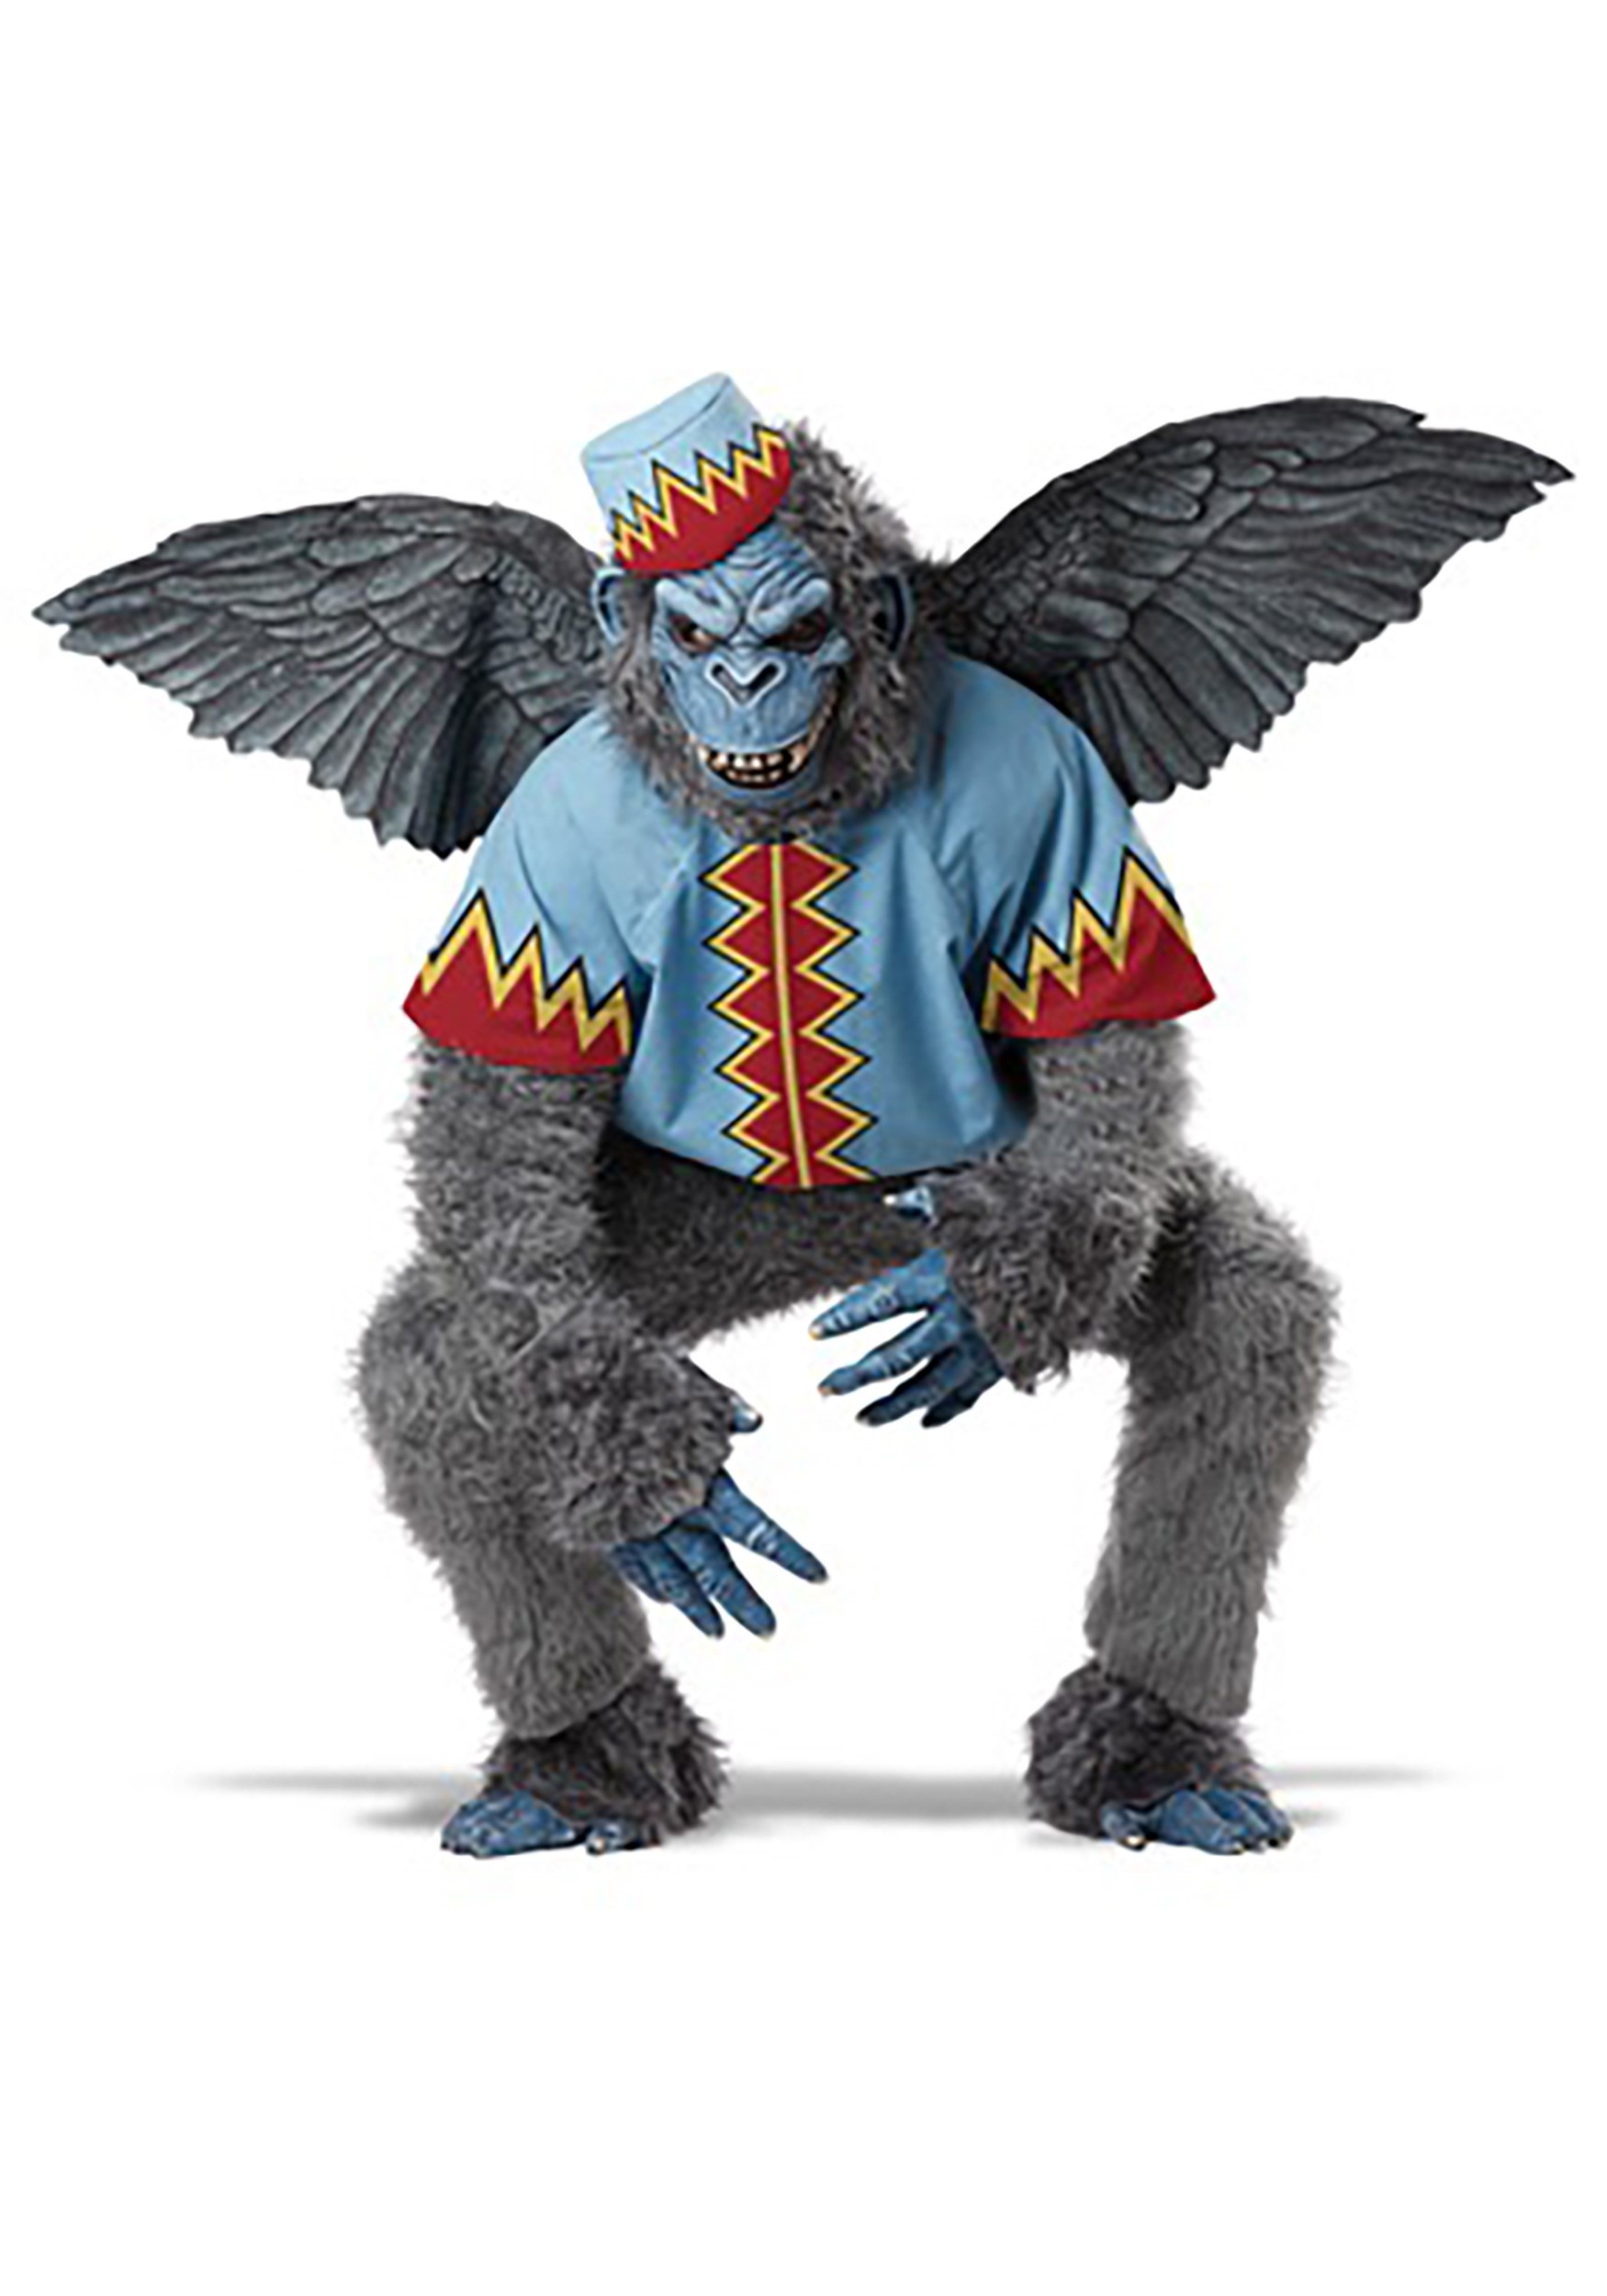 Scary Winged Monkey Costume for Adults